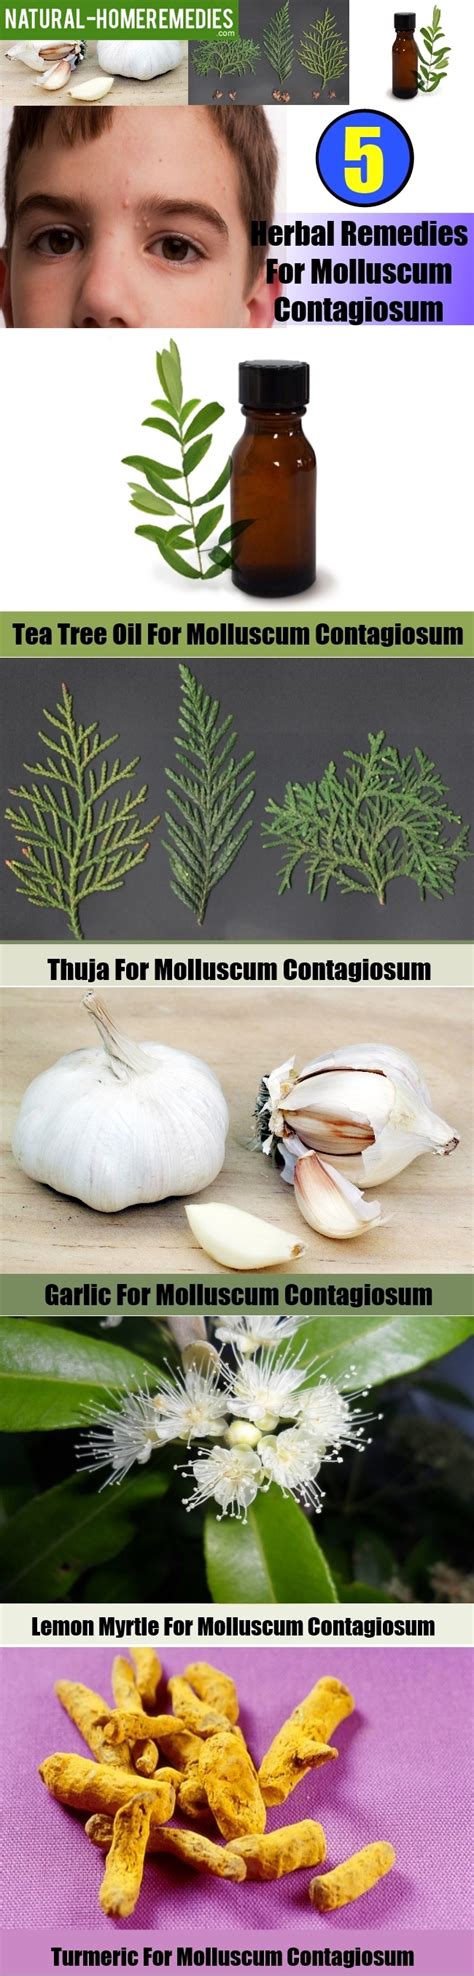 5 Best Herbal Remedies For Molluscum Contagiosum Natural Home